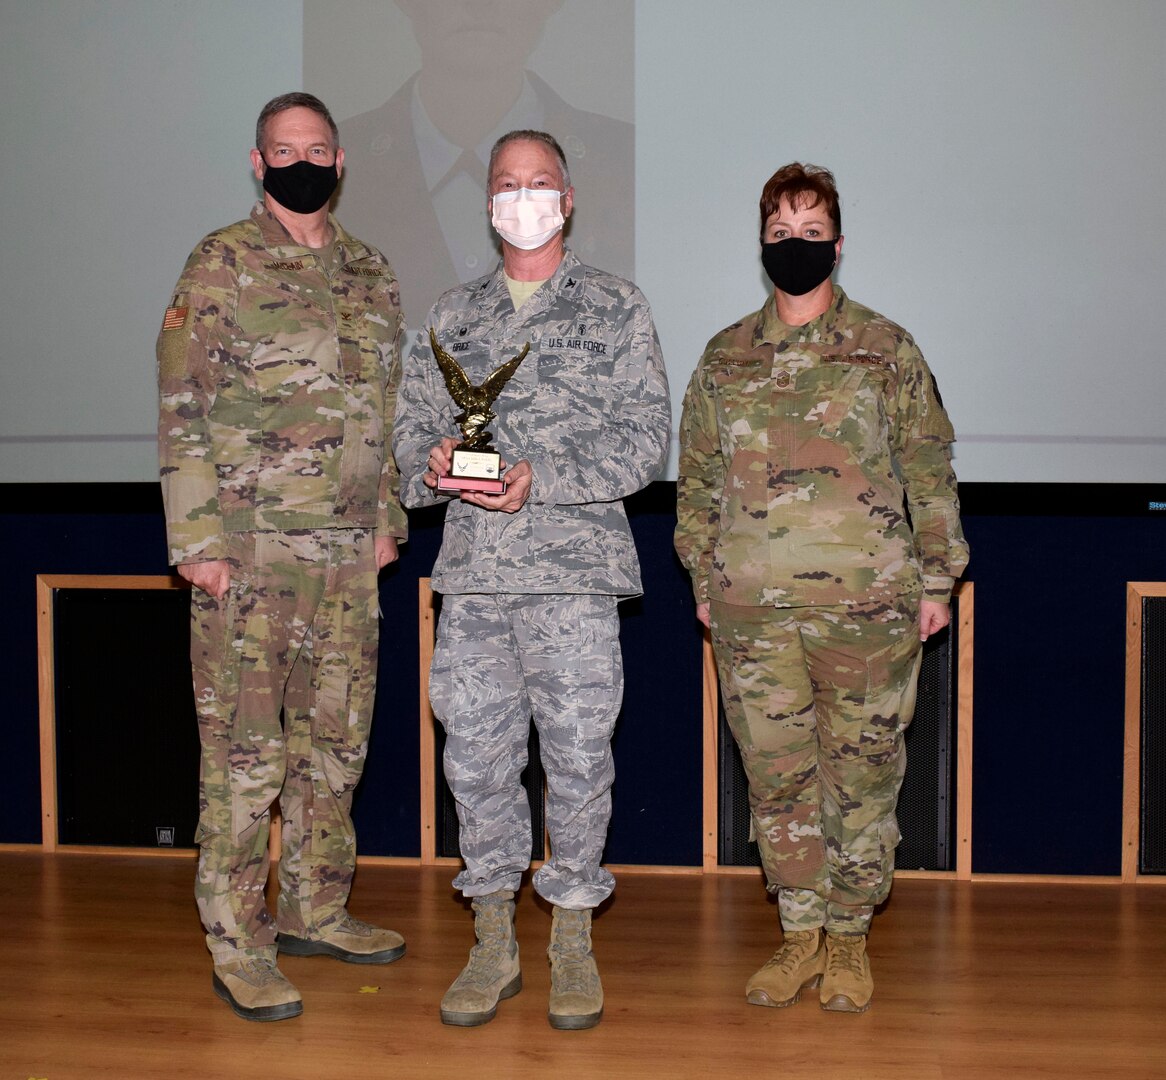 Col. Michael C. Brice, 433rd Medical Group commander (center), accepts the honor guard member category award from Col. Terry W. McClain, 433rd Airlift Wing commander, and Chief Master Sgt. Shana C. Cullum, 433rd AW command chief, on behalf of the winner, Master Sgt. Julie Fuleky, 433rd MDG, during the wing’s annual award recognition ceremony Jan. 30, 2021 at Joint Base San Antonio-Lackland, Texas. Fuleky was unable to attend the ceremony. (U.S. Air Force photo by Airman 1st Class Brittany K. Wich)